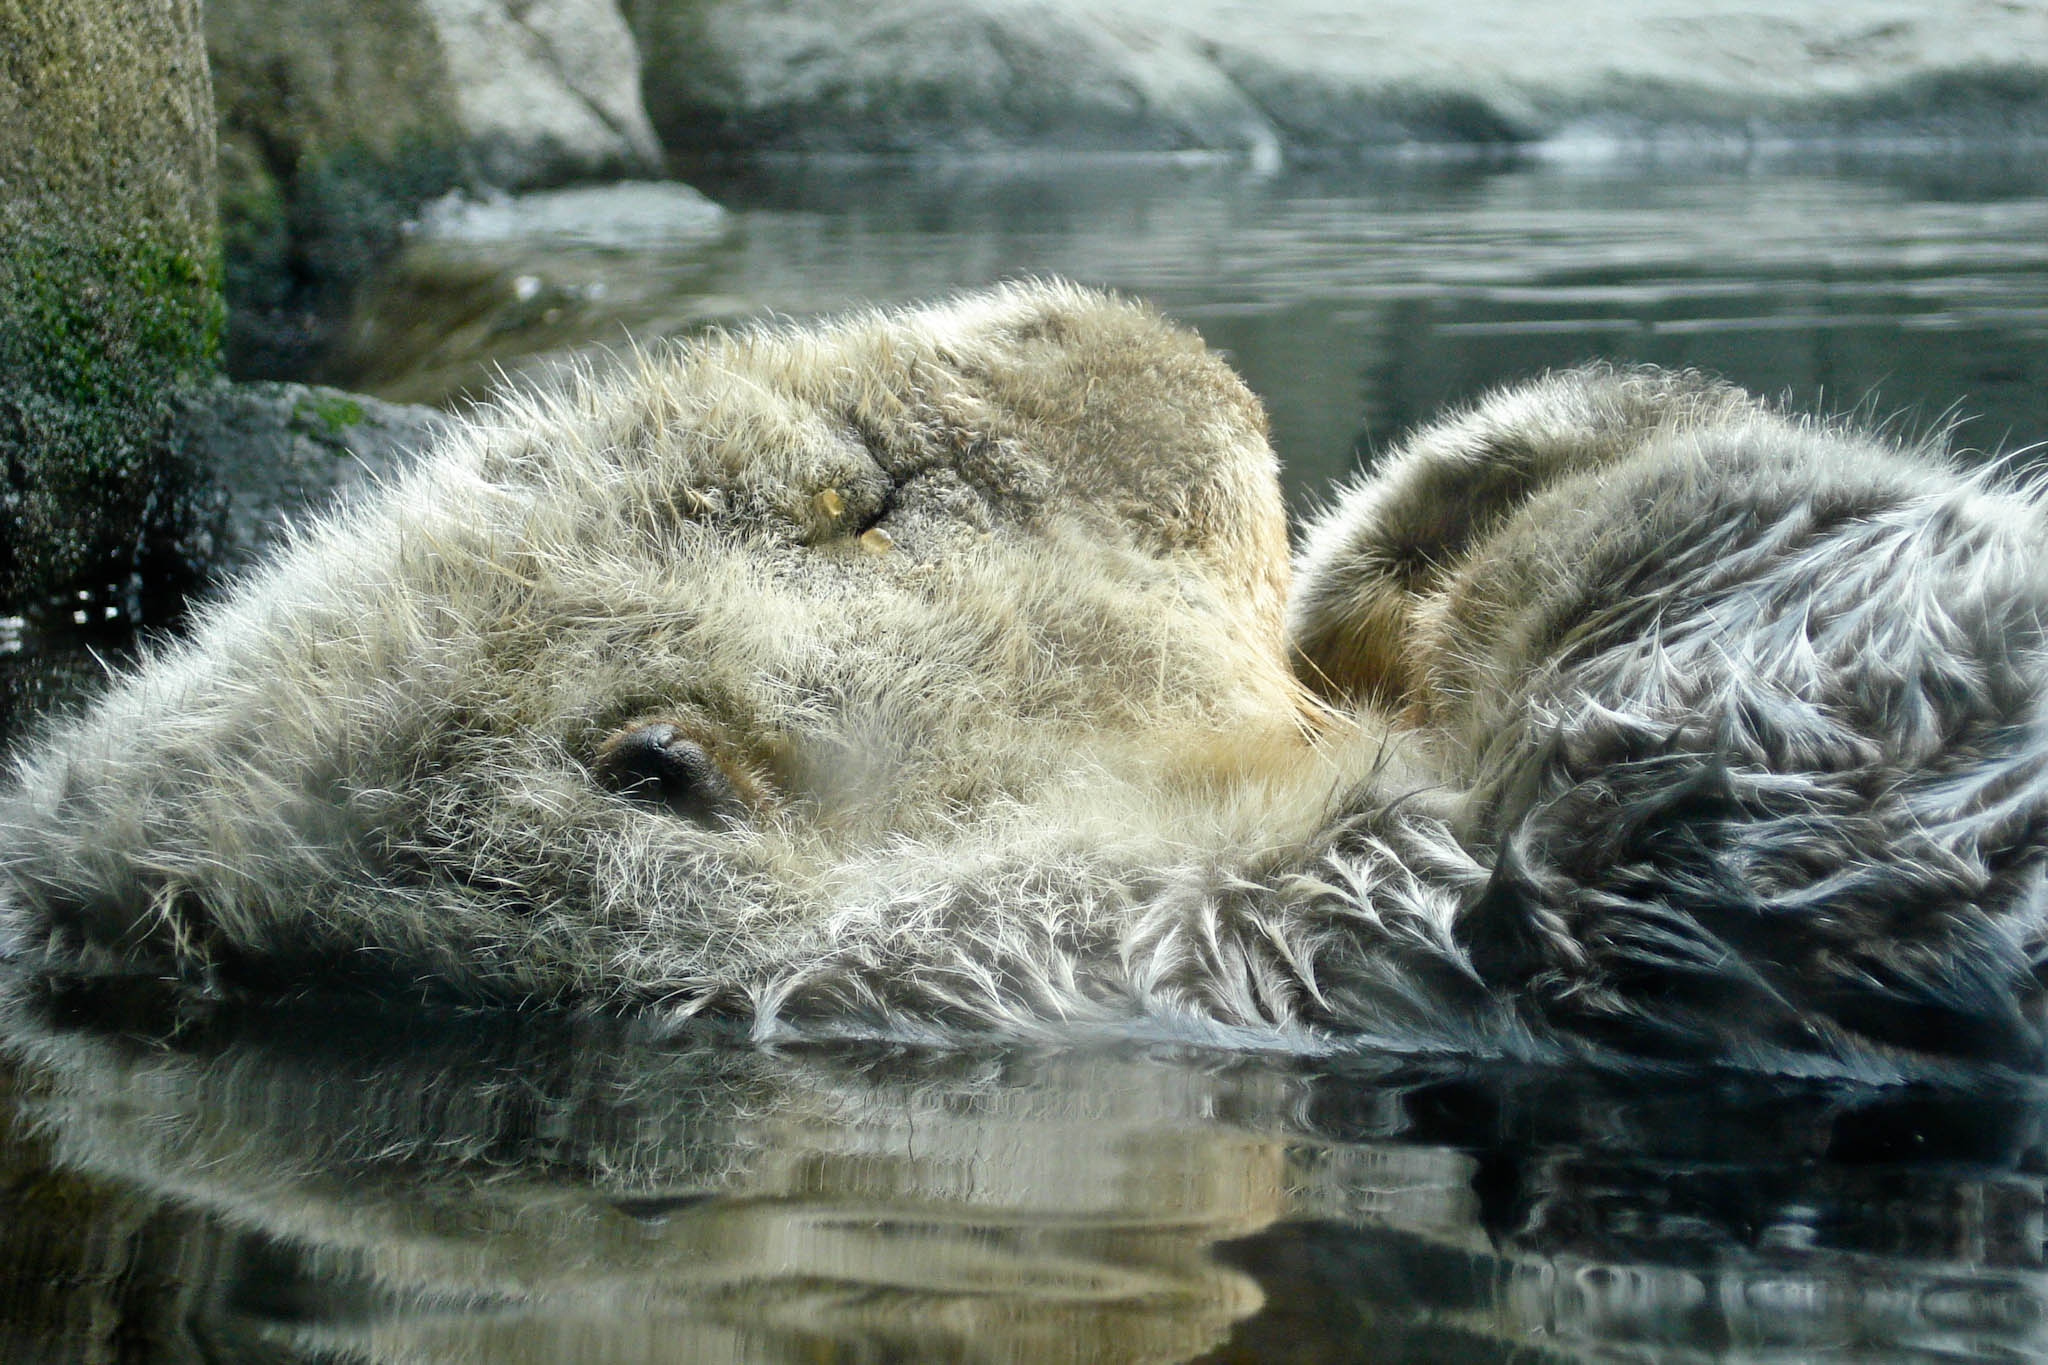 Sea Otter Snoozes So Peacefully